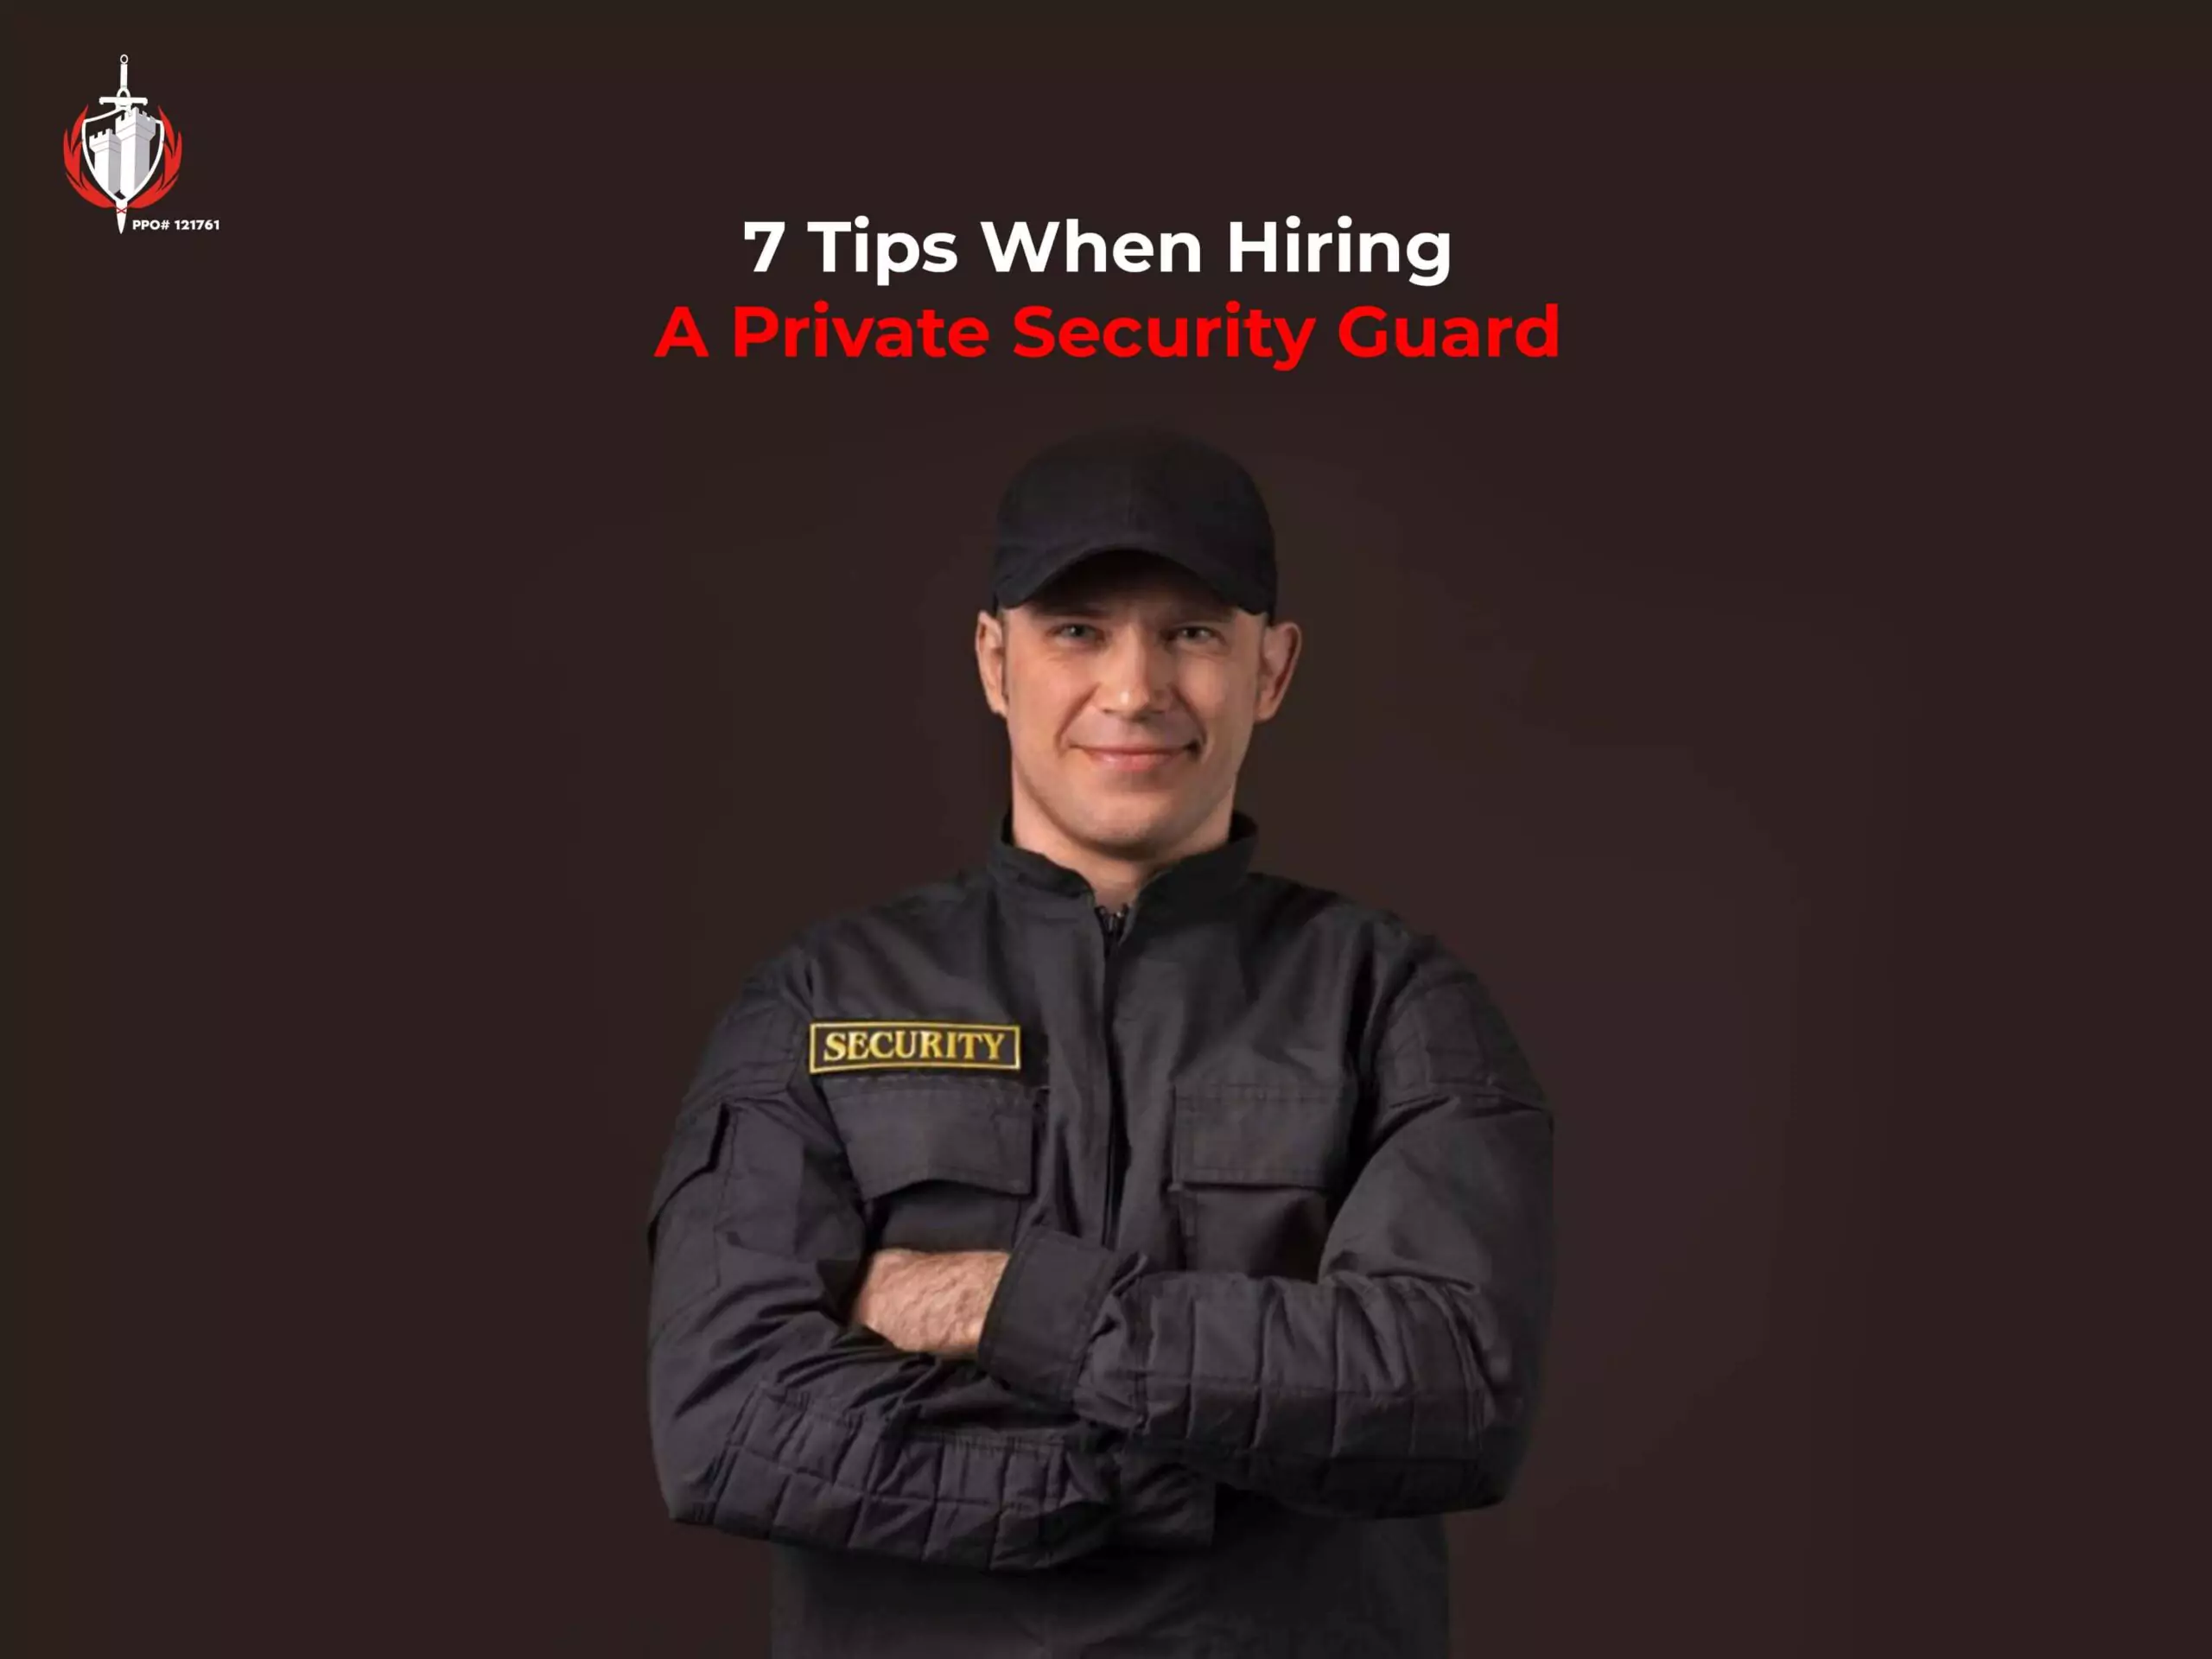 7 Tips When Hiring A Private Security Guard